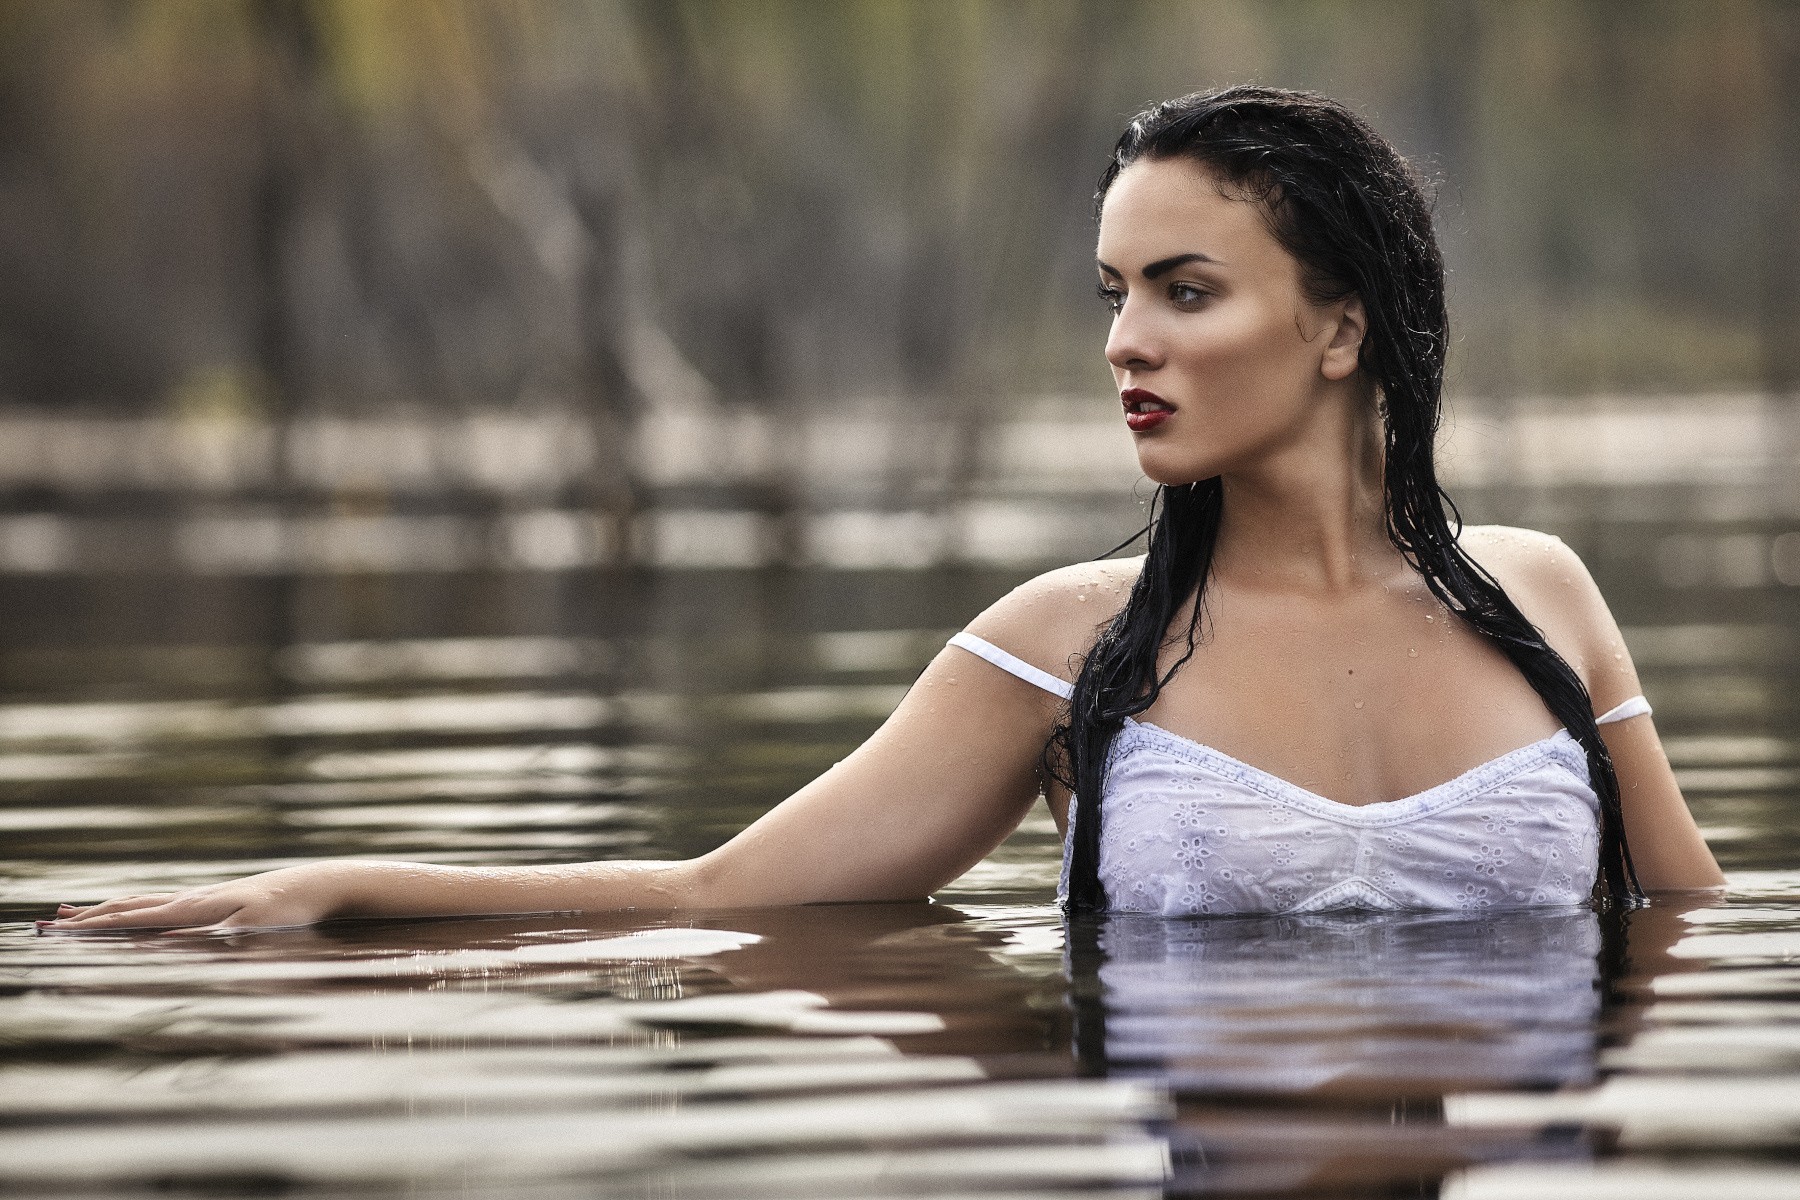 People 1800x1200 women brunette black hair wet red lipstick no bra wet clothing wet hair white clothing Libor Pawlas nipples through clothing women outdoors nature outdoors in water water model wet body